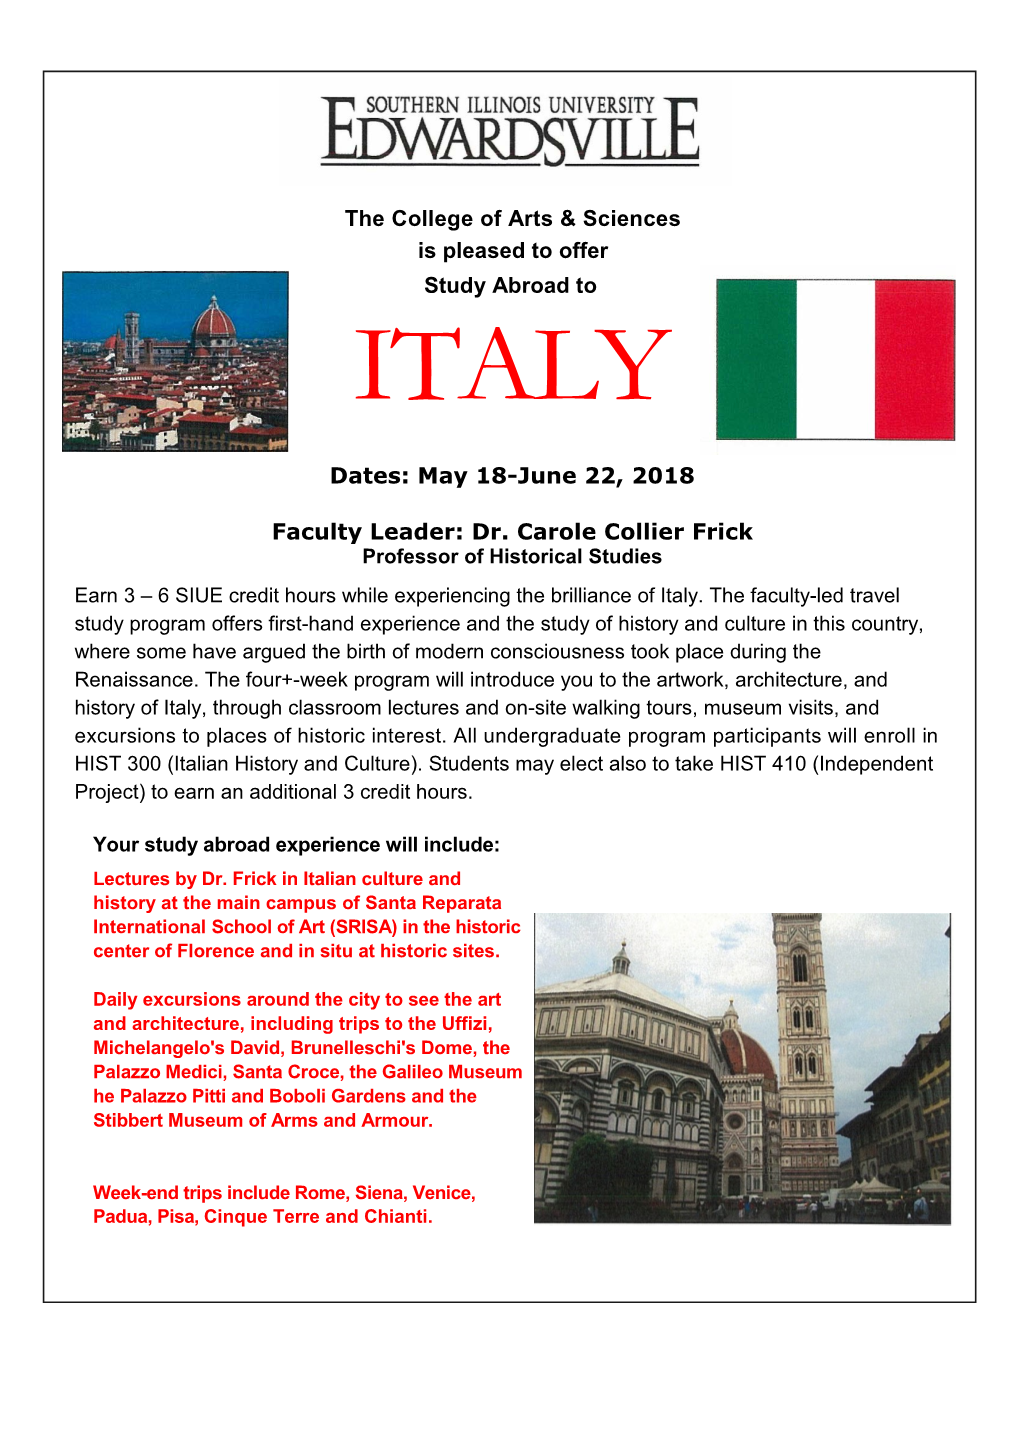 Dr. Carole Collier Frick Professor of Historical Studies Earn 3 – 6 SIUE Credit Hours While Experiencing the Brilliance of Italy